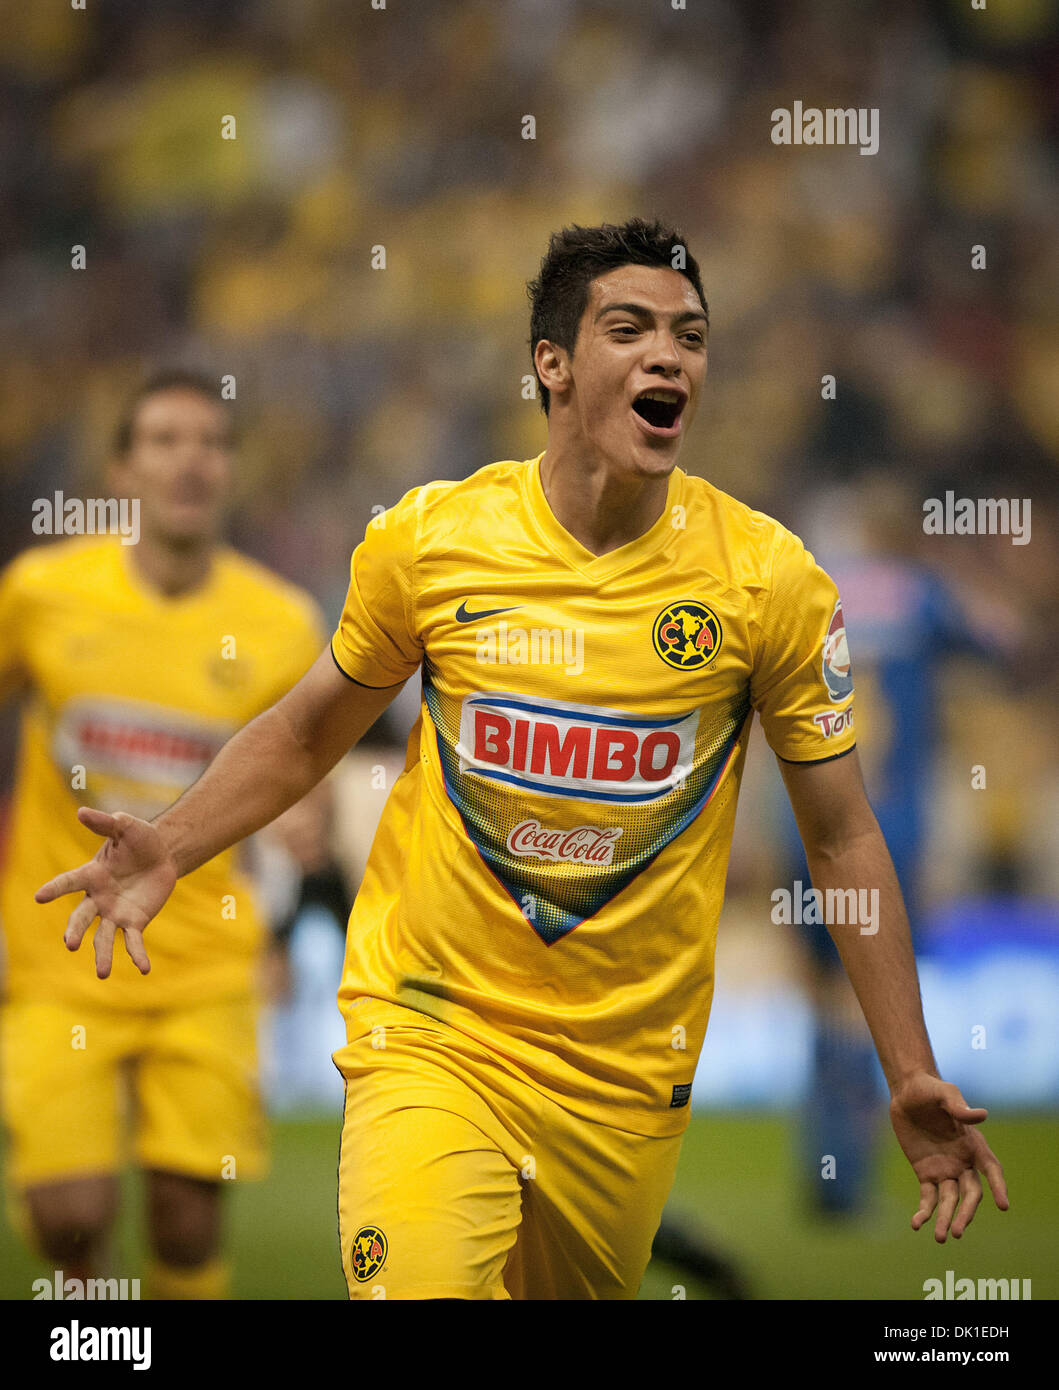 Mexico City, Mexico. 1st December 2013. America's Raul Jimenez celebrates after scoring during a match of the Liga MX against Tigres, held in the Azteca Stadium in Mexico City, capital of Mexico, on Dec. 1, 2013. (Xinhua/Pedro Mera/Alamy Live News) Stock Photo